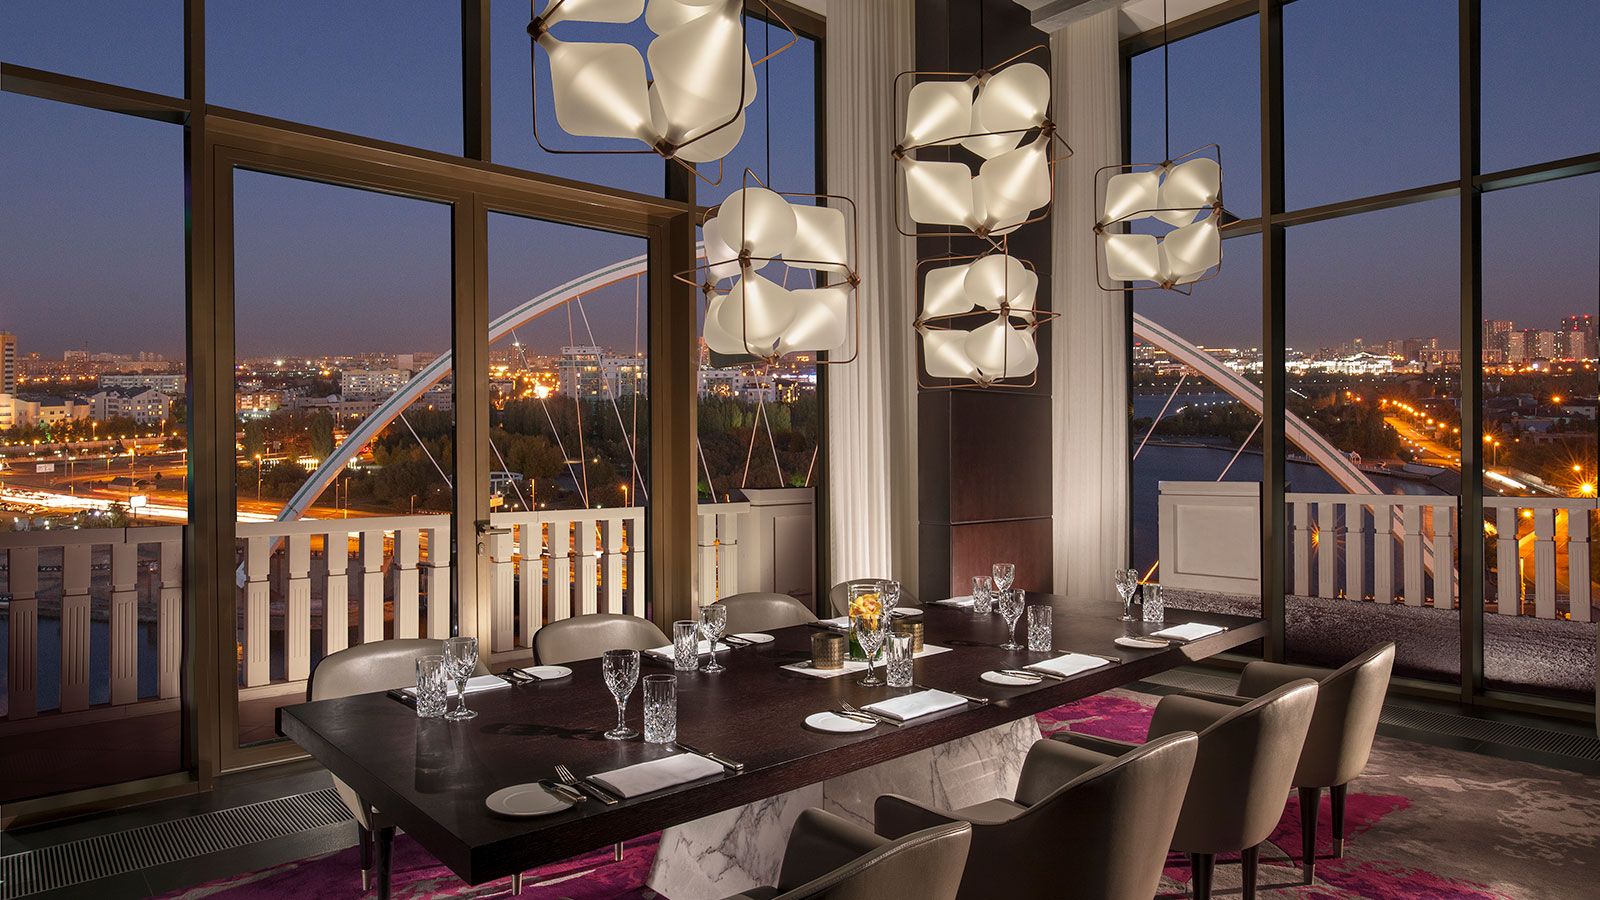 a table with chairs and plates in a room with a view of a city